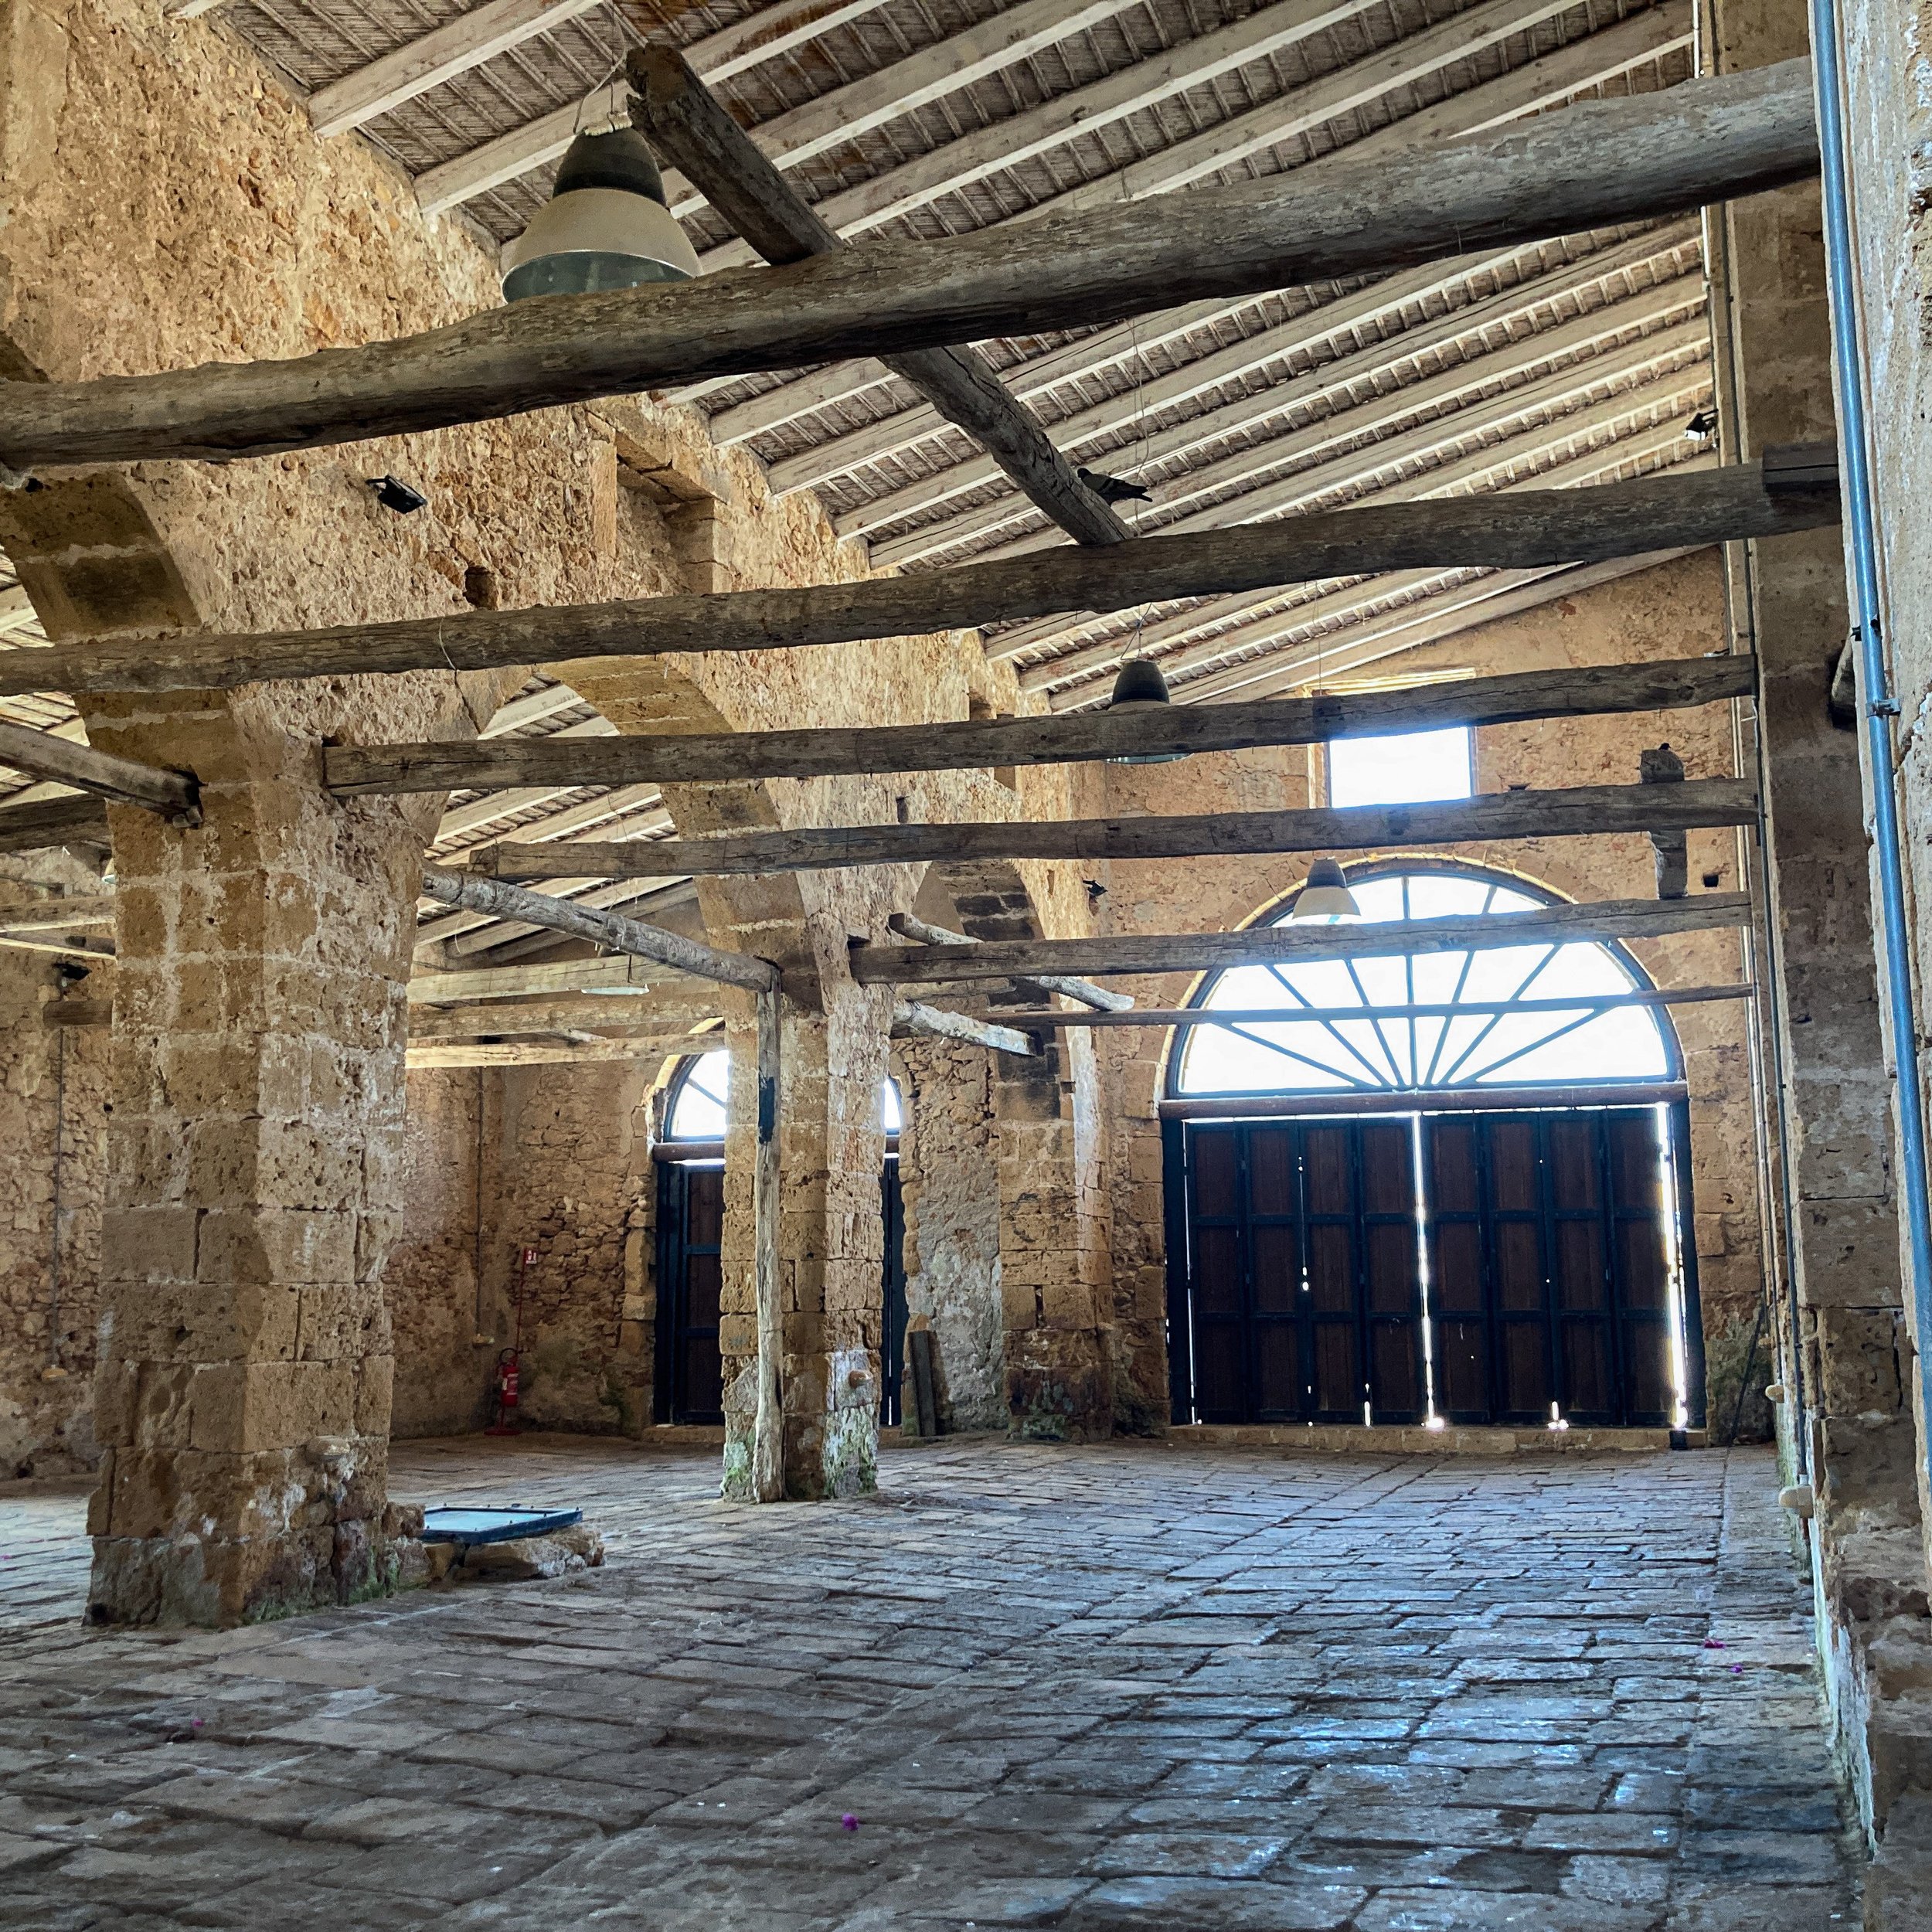  Figure 9. The interior of the Loggia at the Tonnara di Marzamemi. Photograph by G. Vaccarino Gearty, 2022. 